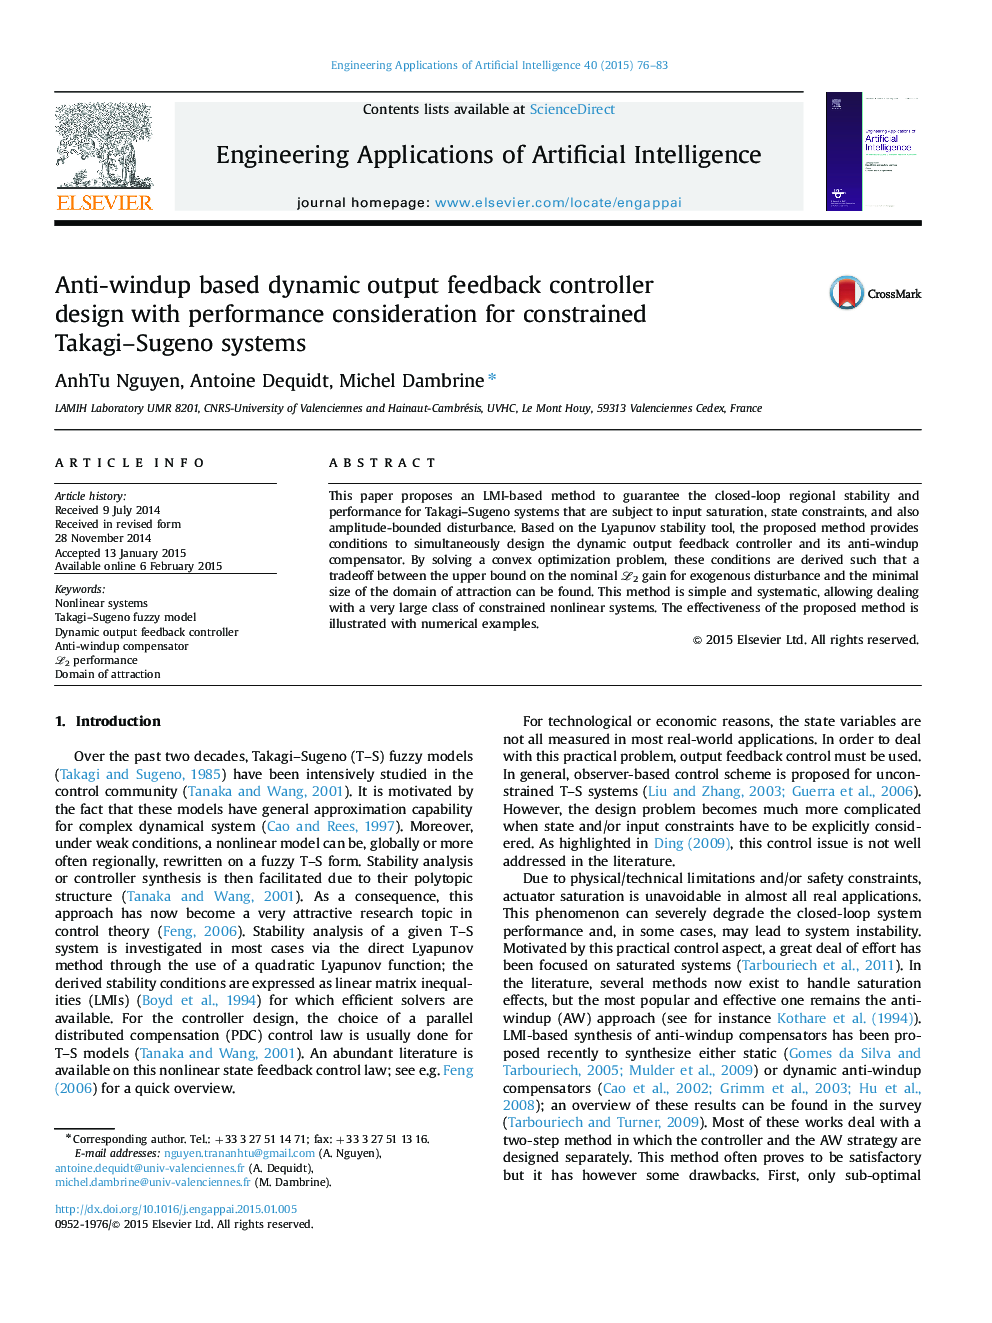 Anti-windup based dynamic output feedback controller design with performance consideration for constrained Takagi–Sugeno systems